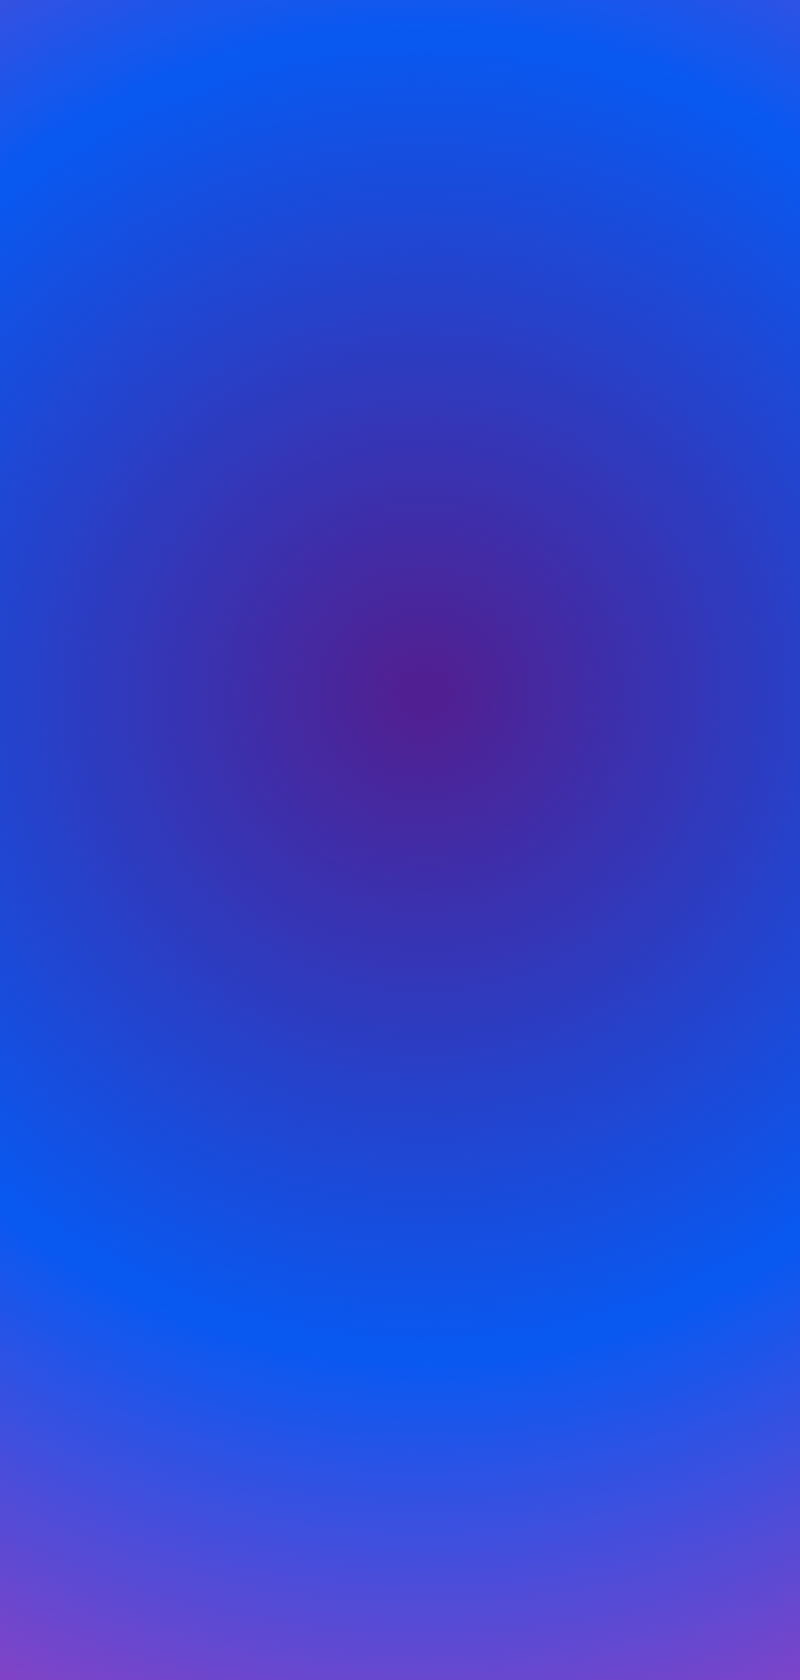 Gradient Blue, Aurel, abstract, amoled, android, art, aura, aurora, background, blur, blurry, calm, color, colorful, colors, colours, cool, dark, fresh, ios, minimal, minimalistic, modern, new, nice, oled, quality, simple, wallpapper, HD phone wallpaper